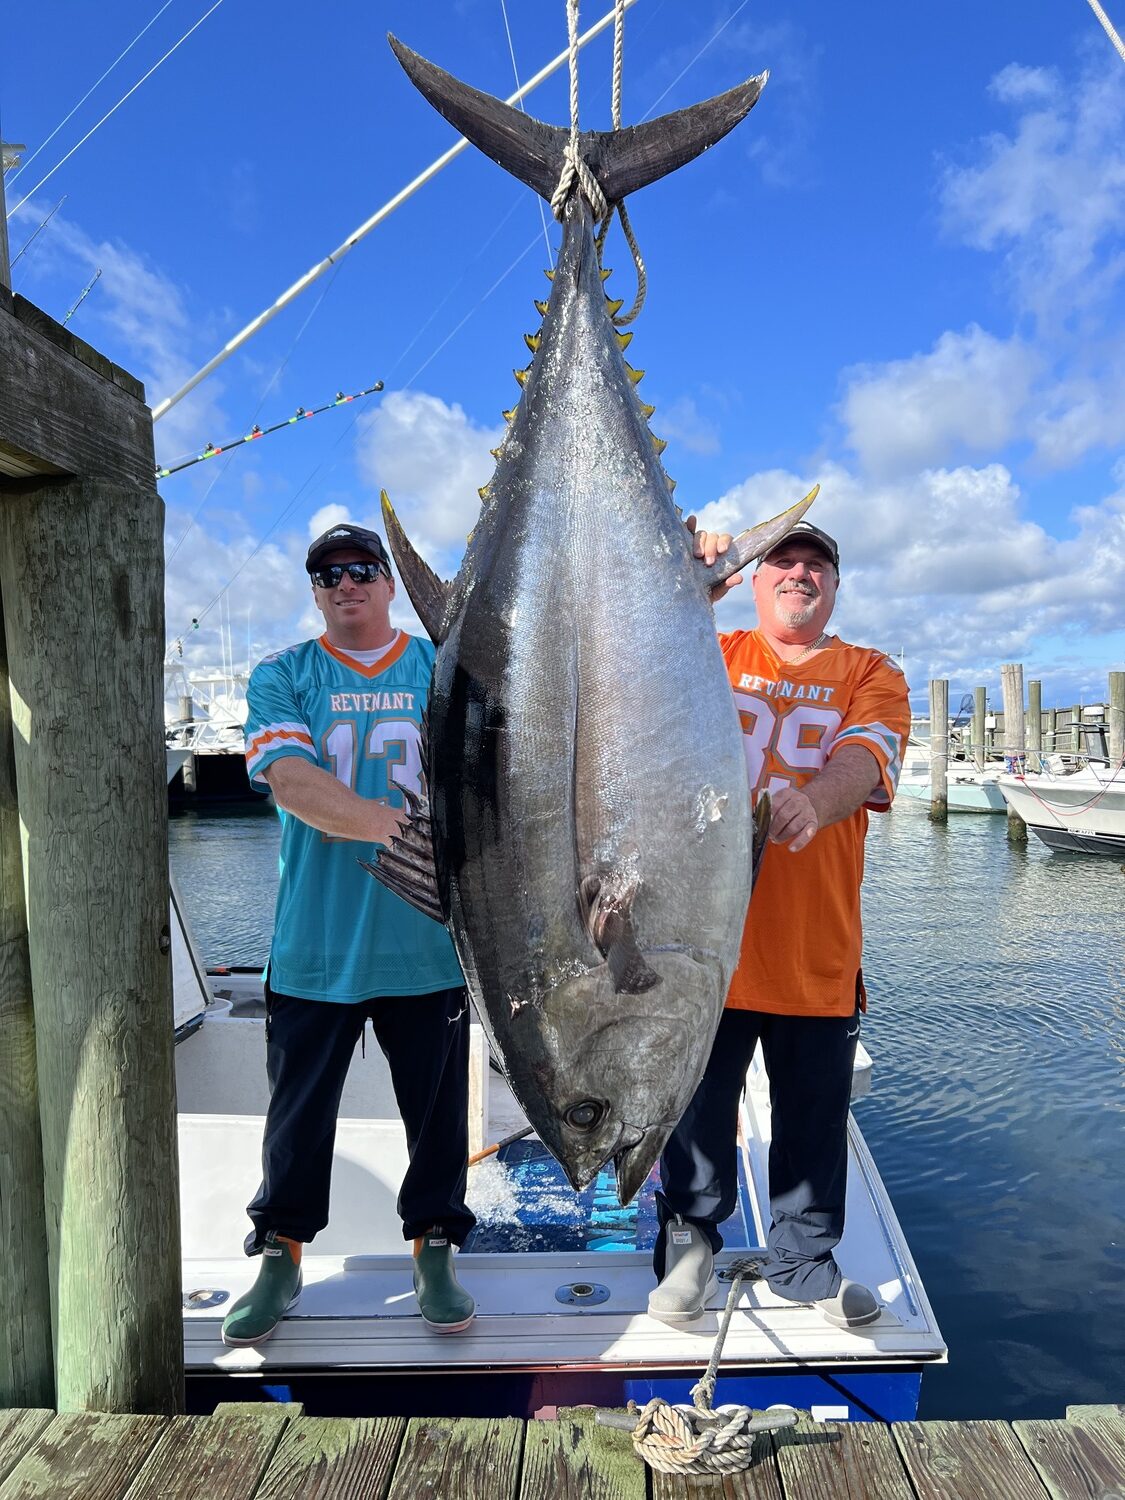 Teddy and Ted Prager with a fish of a lifetime: a 323 pound bigeye tuna. The father-son team caught the fish board their boat Revenant while fishing at Hudson Canyon and weighed it in at Oaklands Marina in Hampton Bays last month.
DAN MATTEO